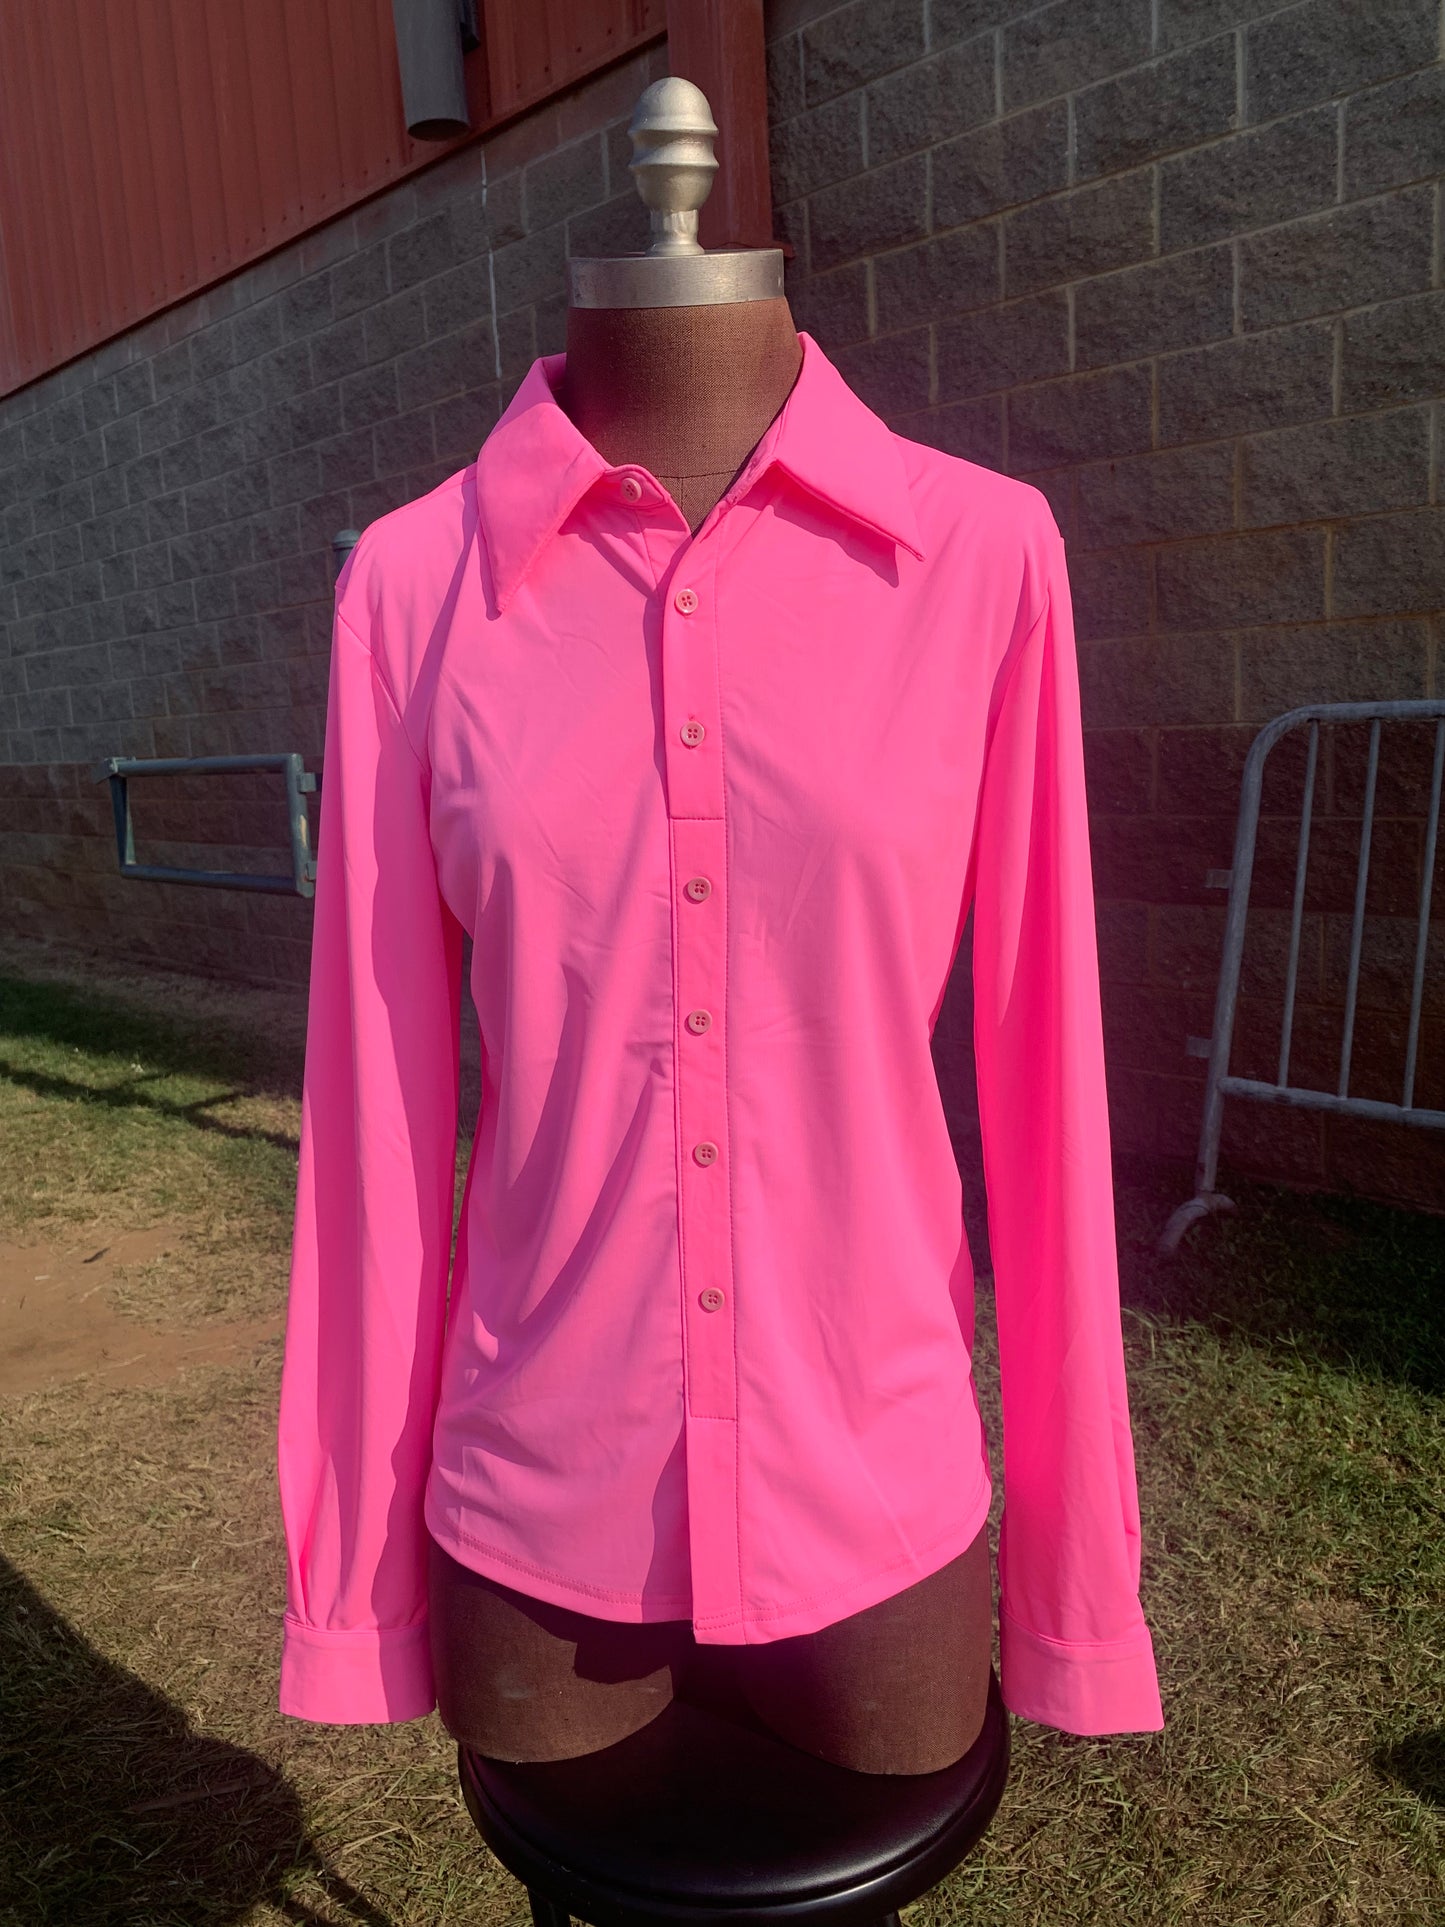 Twisted Equine “Barbiegum” UV Cooling Material Pullover Button Up Long Sleeve Shirt